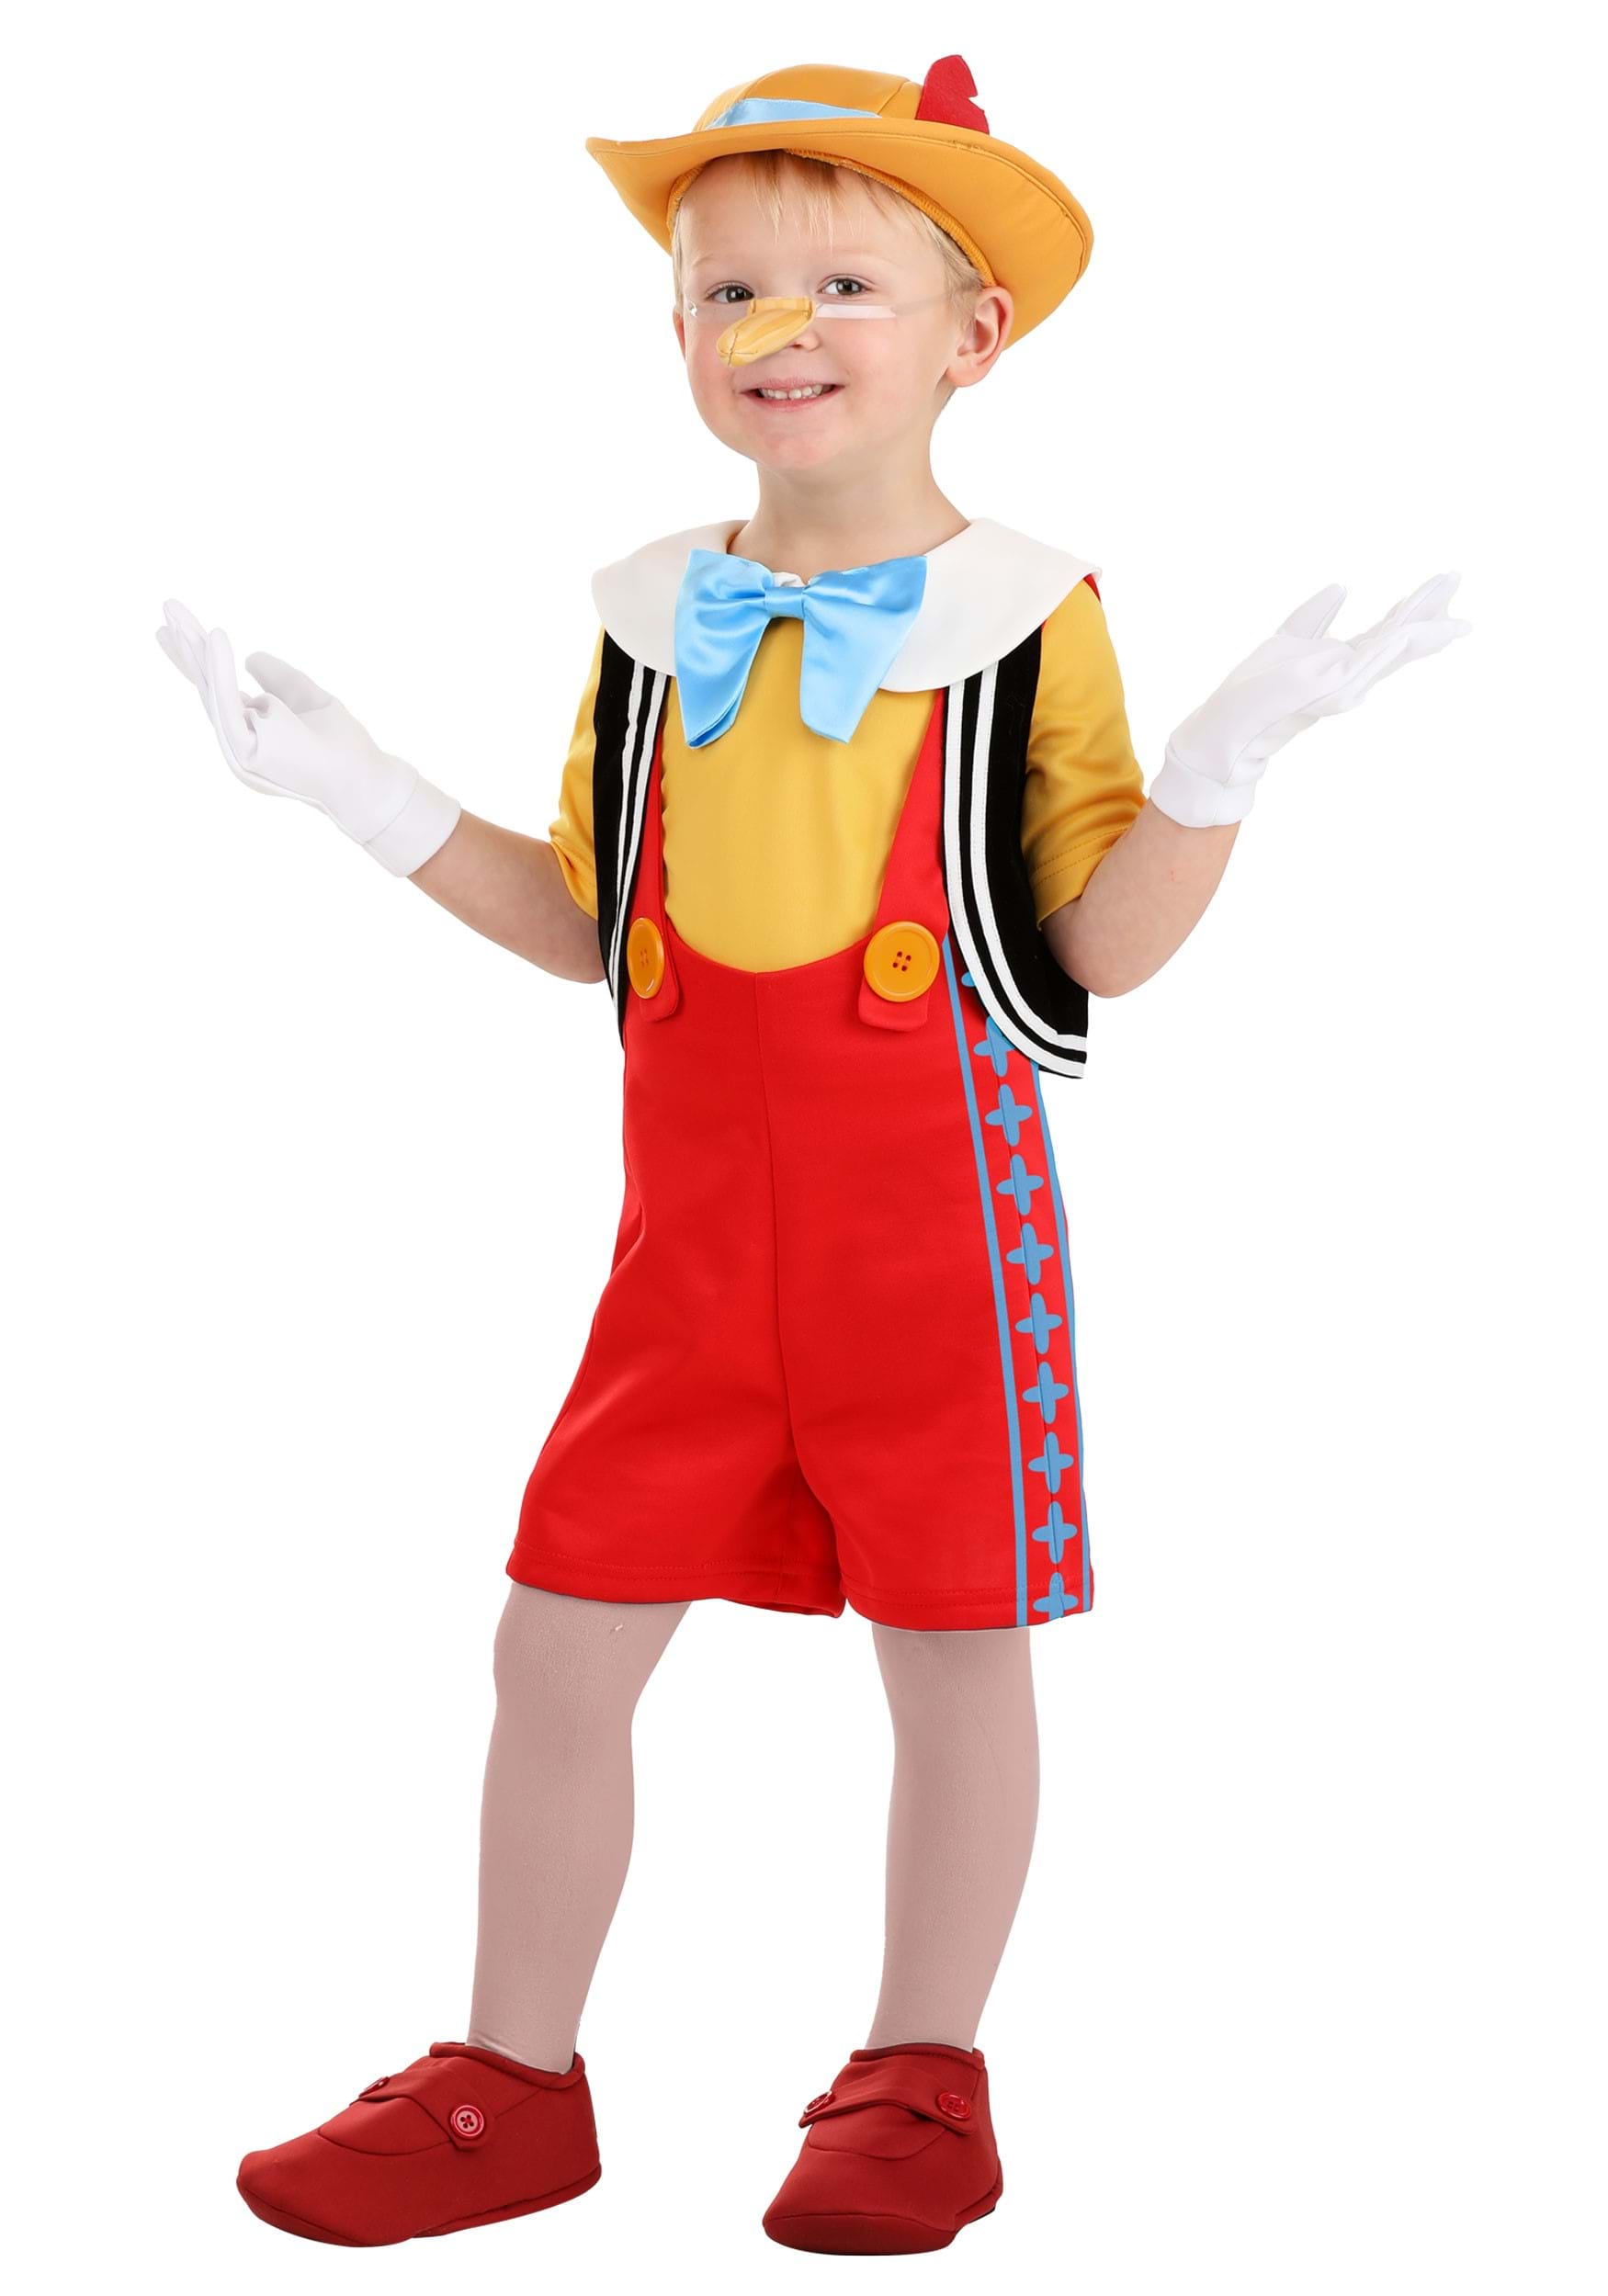 Photos - Fancy Dress Toddler FUN Costumes  Pinocchio Deluxe Costume Black/Red/Yellow FUN 